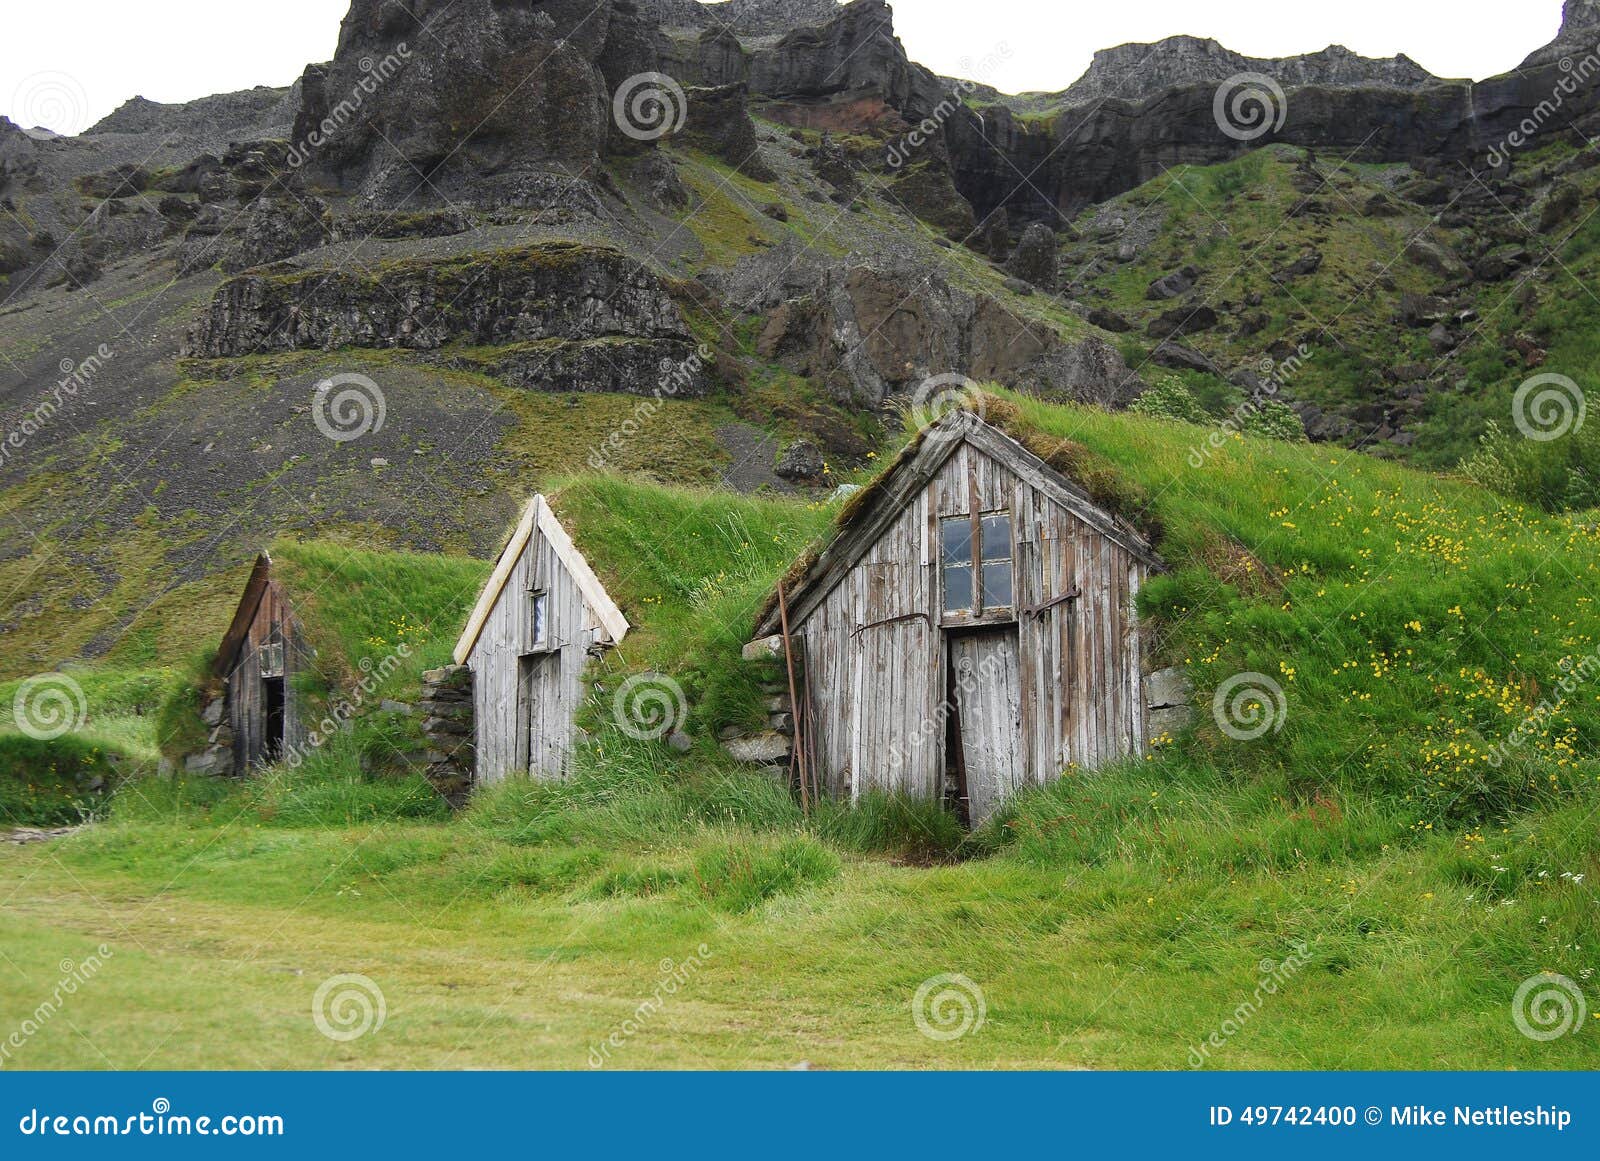 grass roofed houses iceland used as shelter travellers to take refuge bad weather their journey 49742400